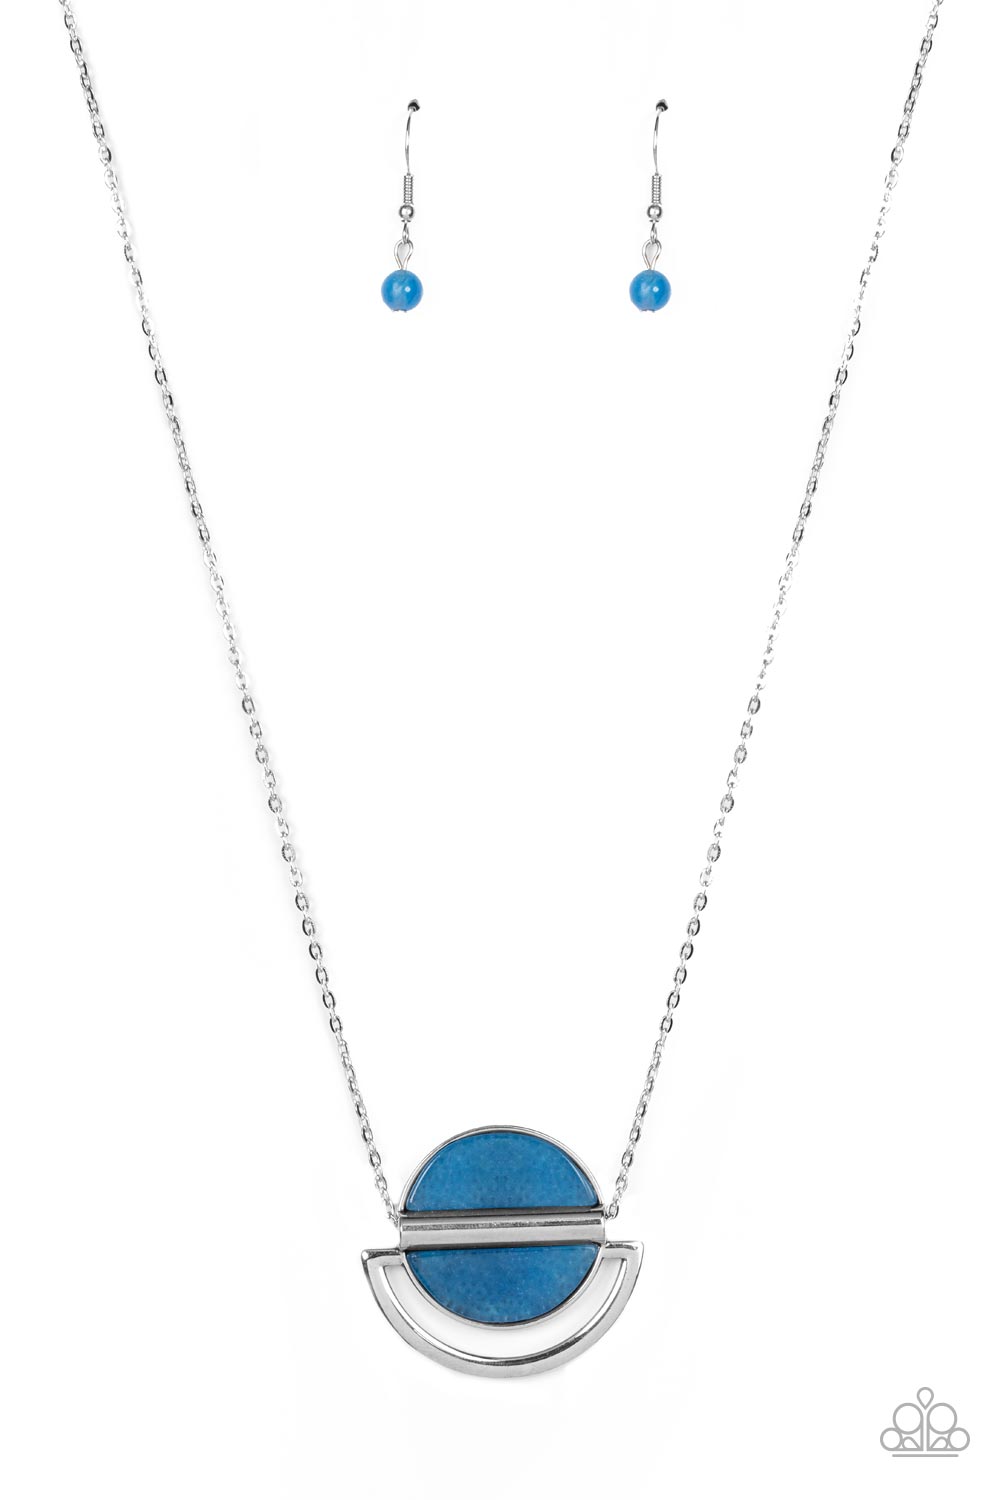 Ethereal Eclipse Paparazzi Accessories Necklace with Earrings Blue